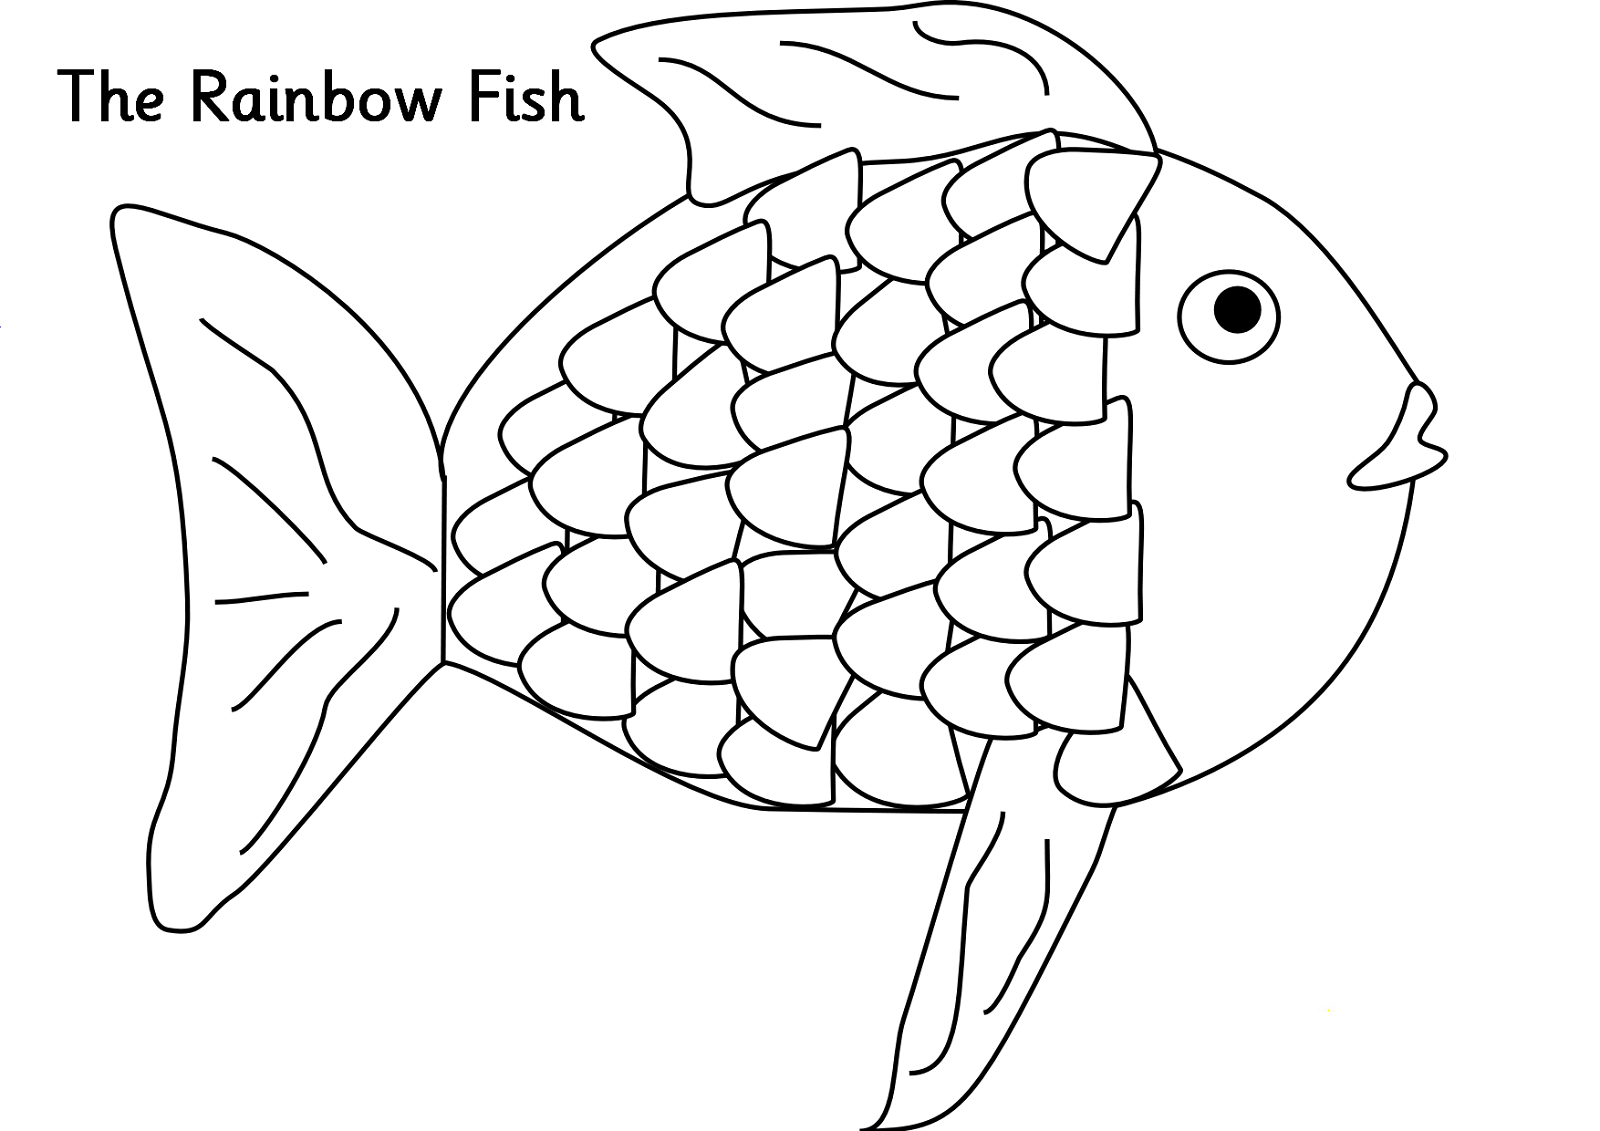 fish-coloring-page-2020-printable-activity-shelter